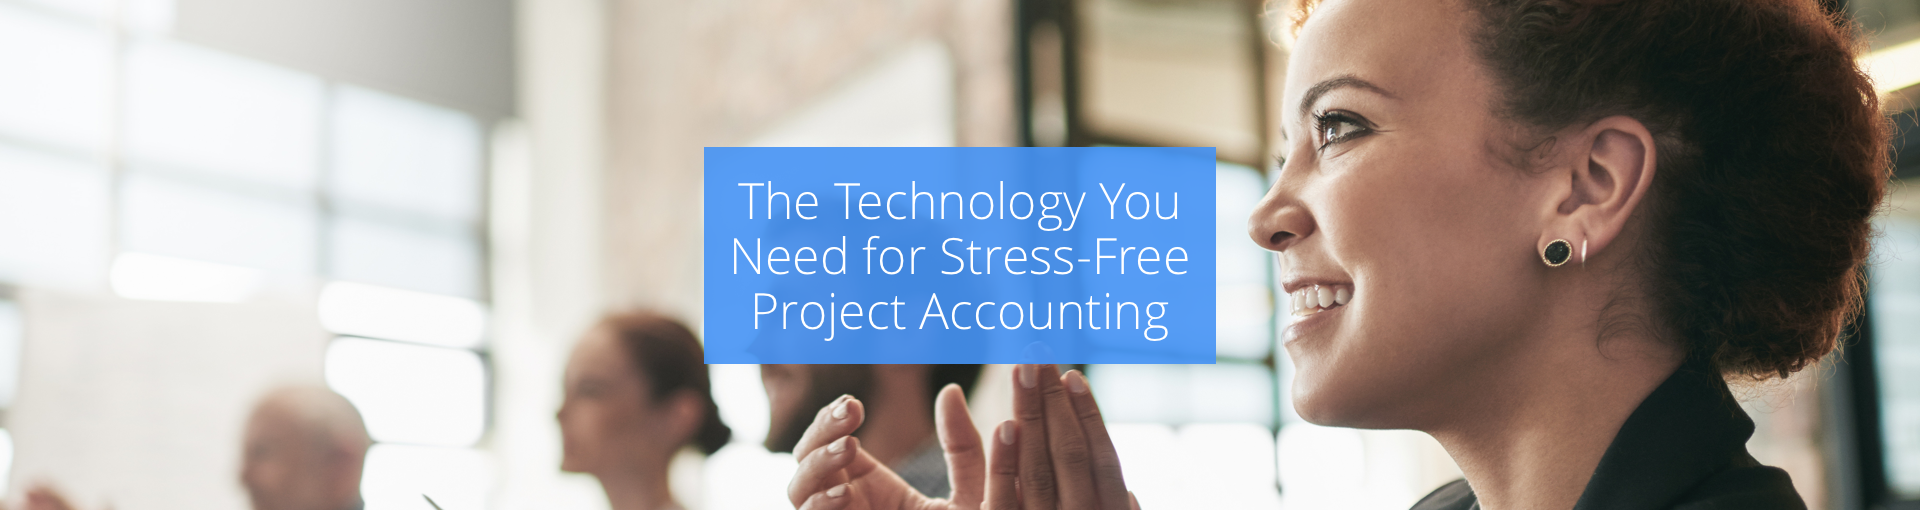 The Technology You Need for Stress-Free Project Accounting Featured Image